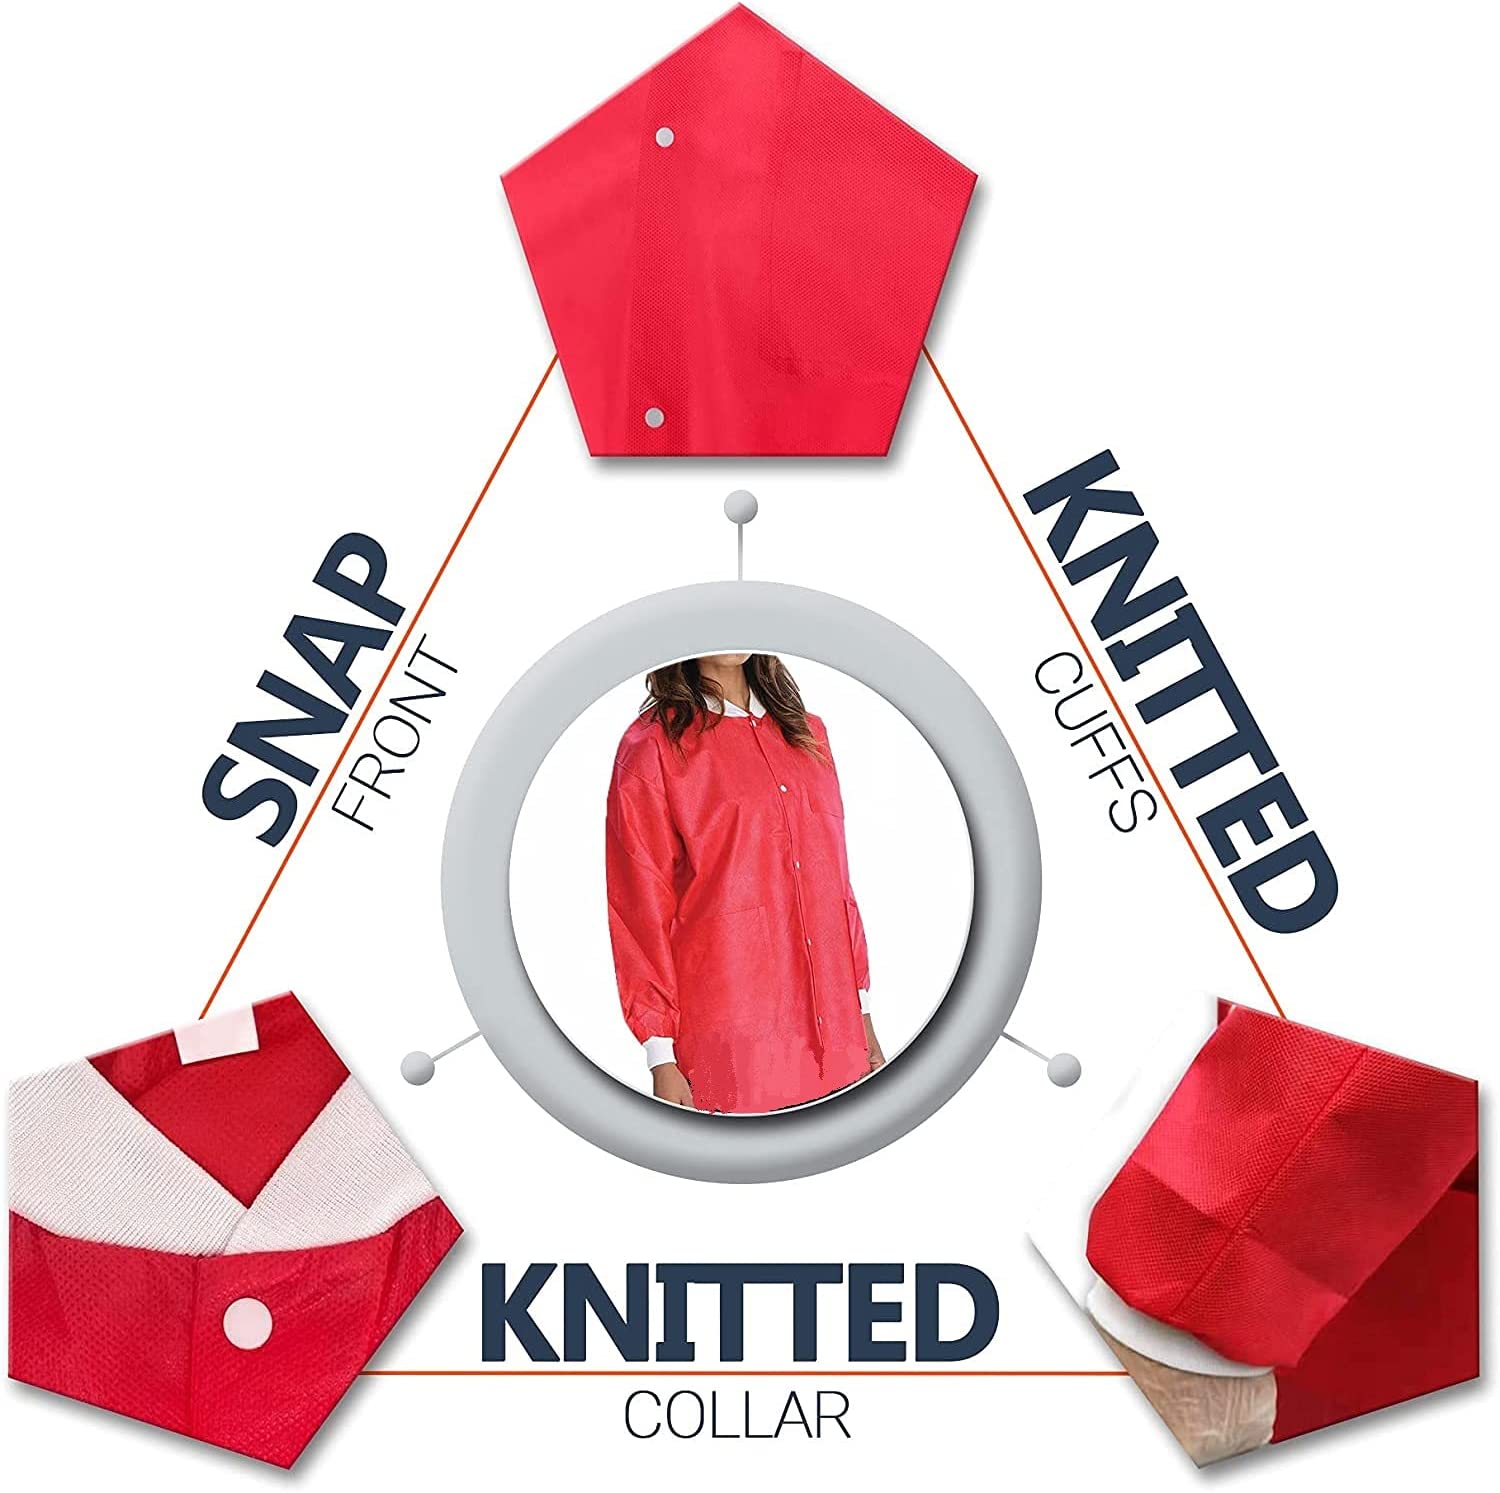 Knitted collar red lab coat